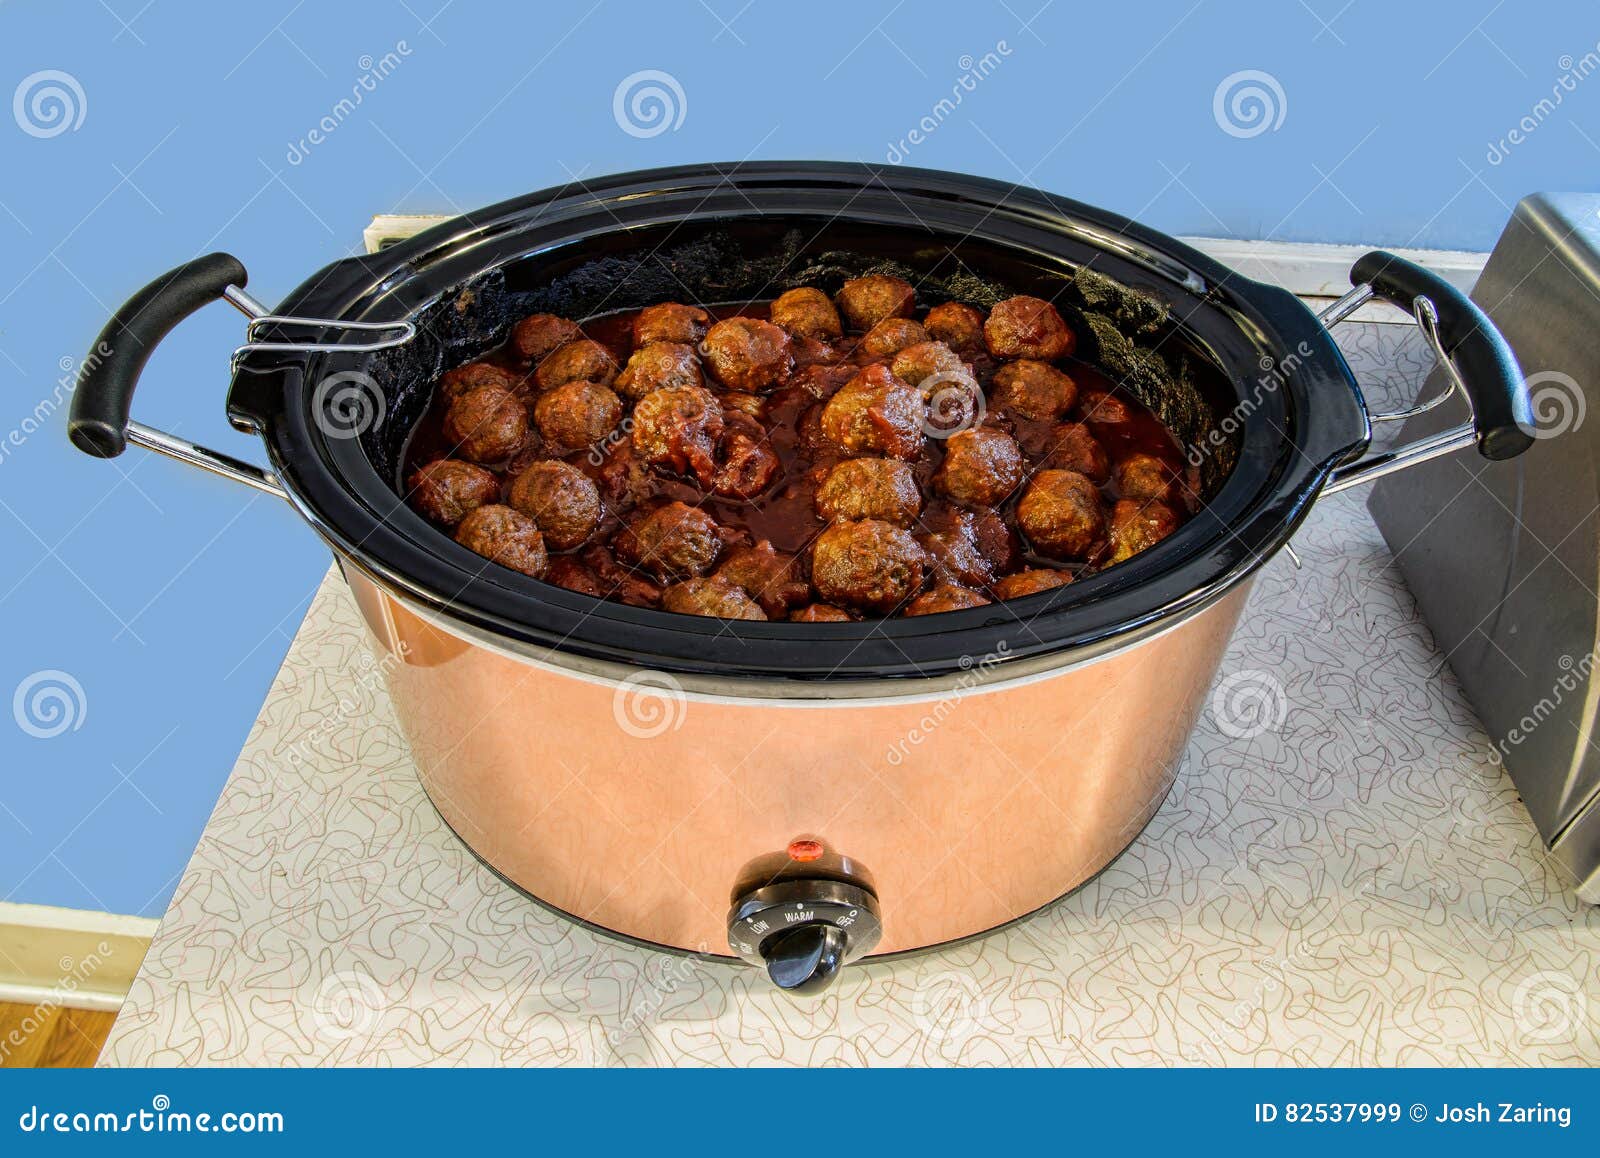 meatballs in stainless crock pot slow cooker on counter